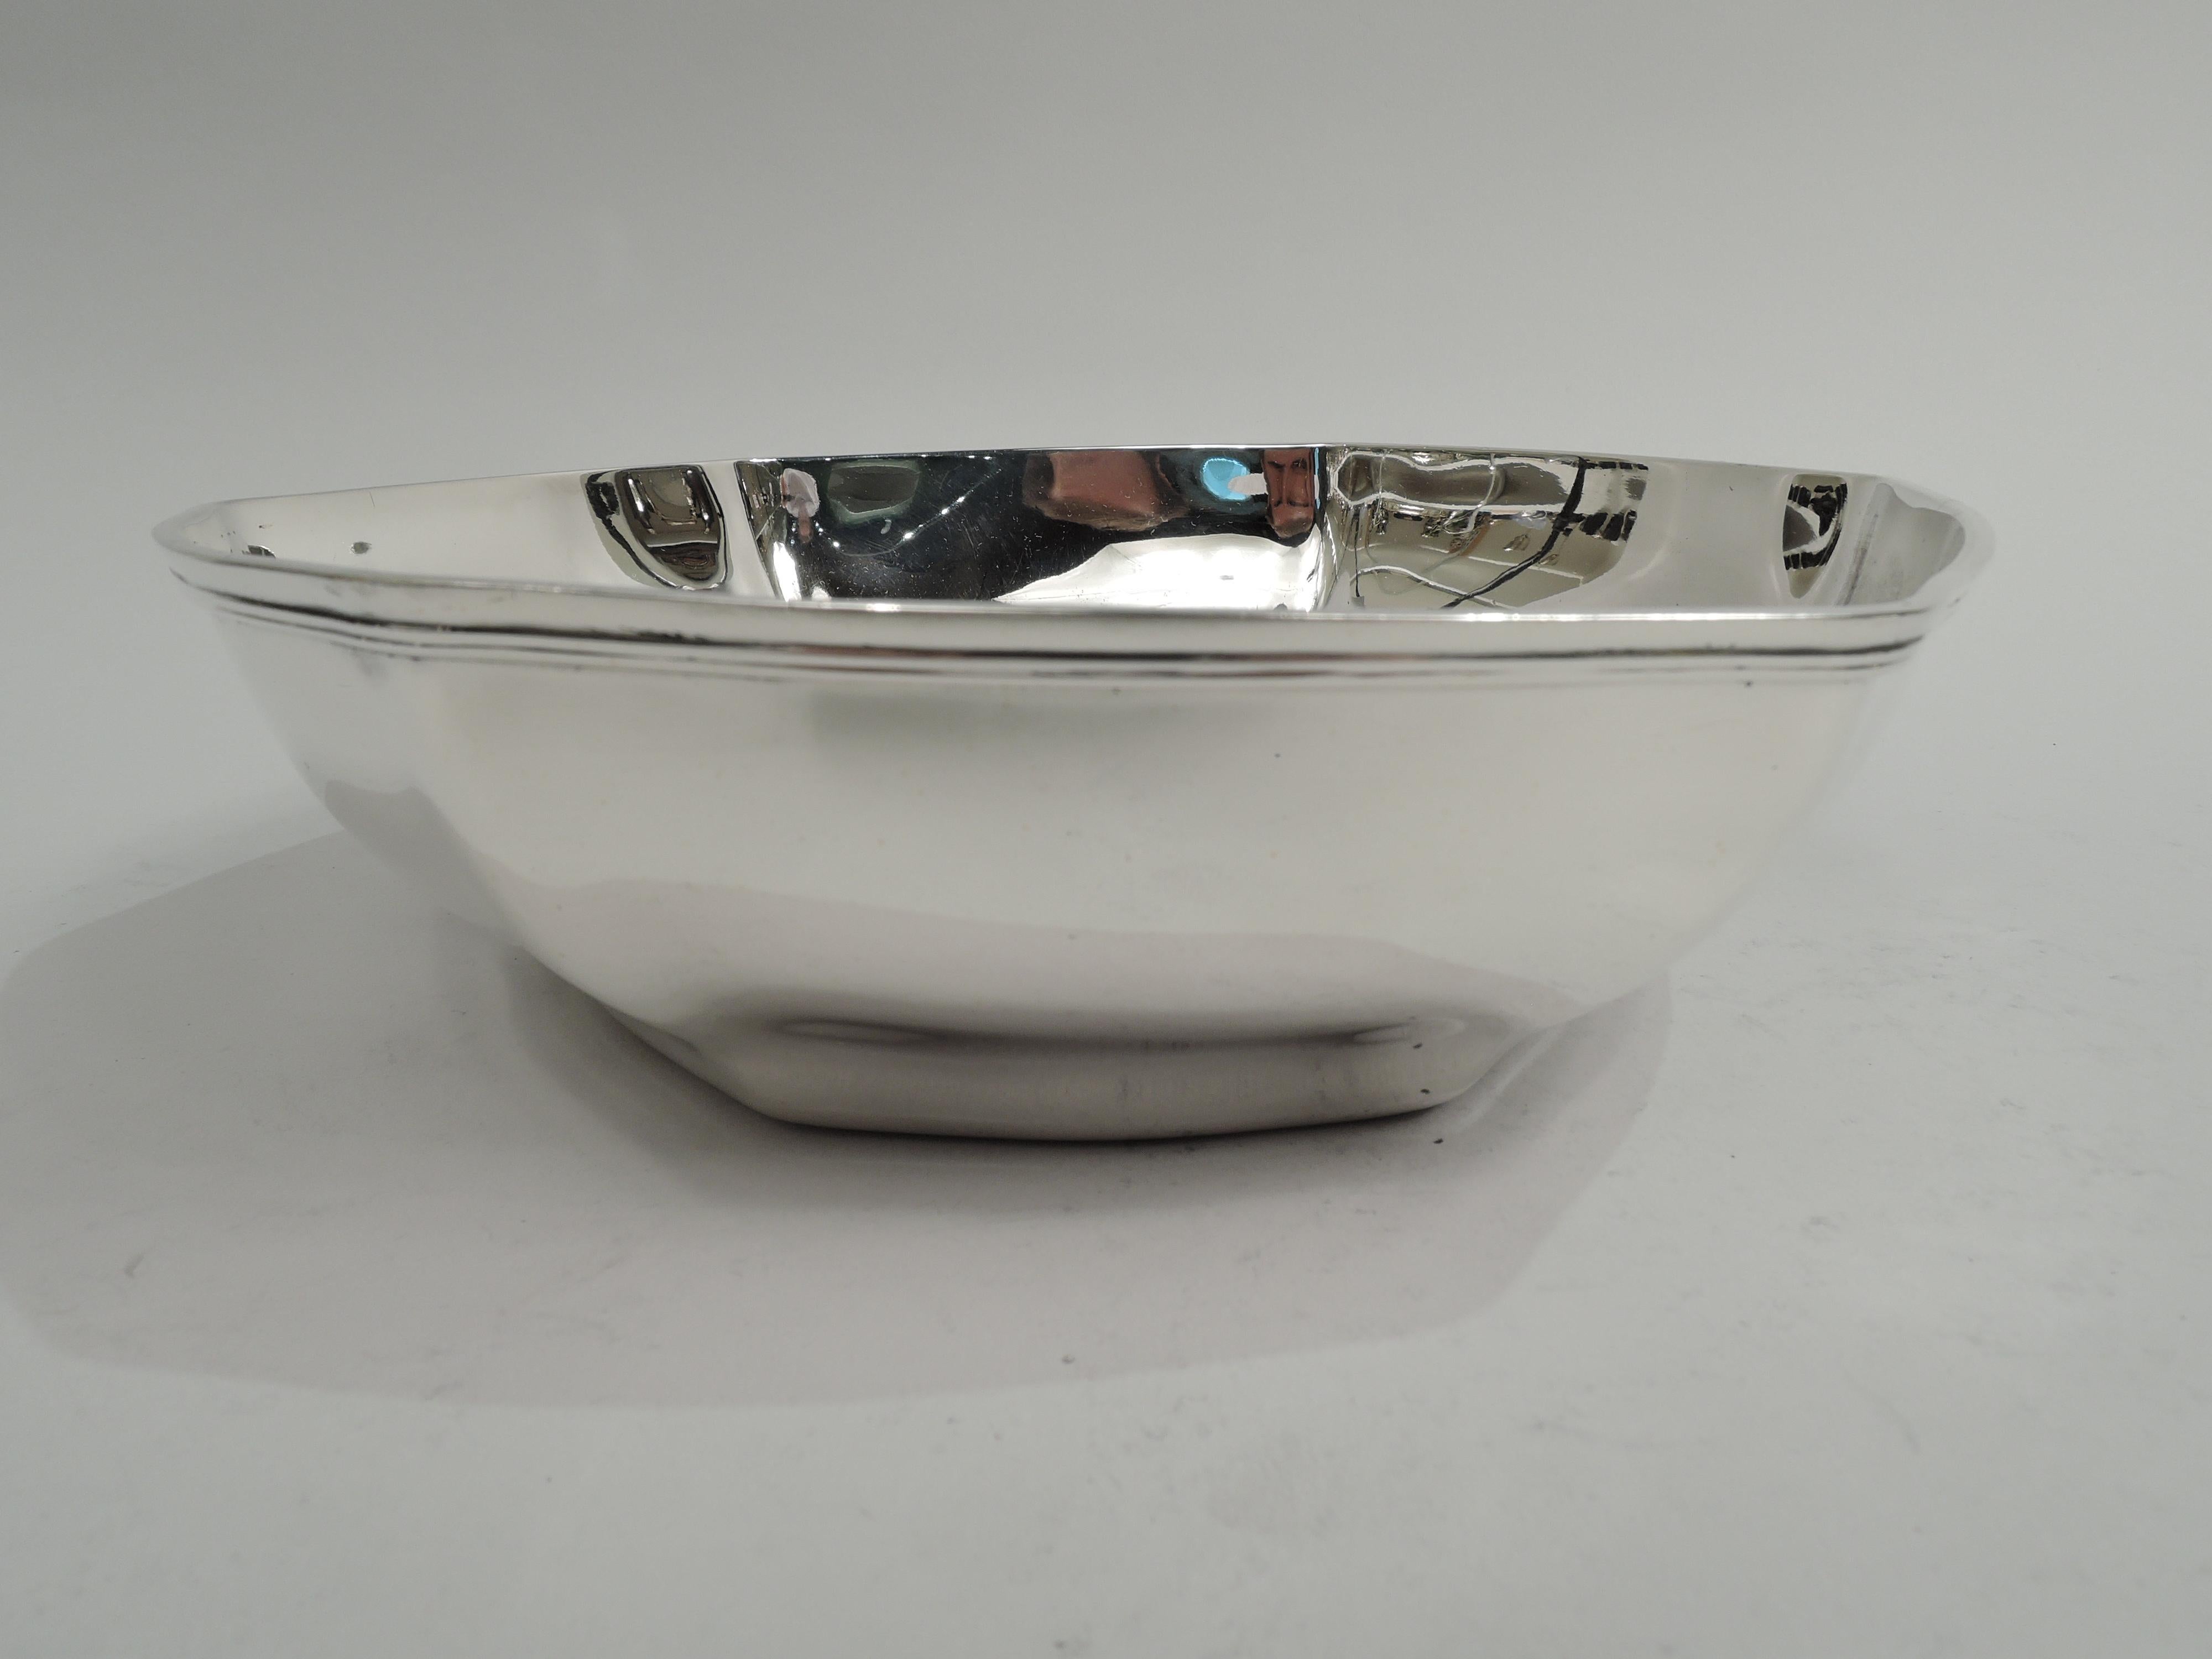 Art Deco sterling silver bowl. Made by Tiffany & Co. in New York, circa 1920. Hexagonal with curved and tapering sides and reeded rim. A softened version of the geometric style. Fully marked including maker’s stamp, pattern no. 18165, and director's